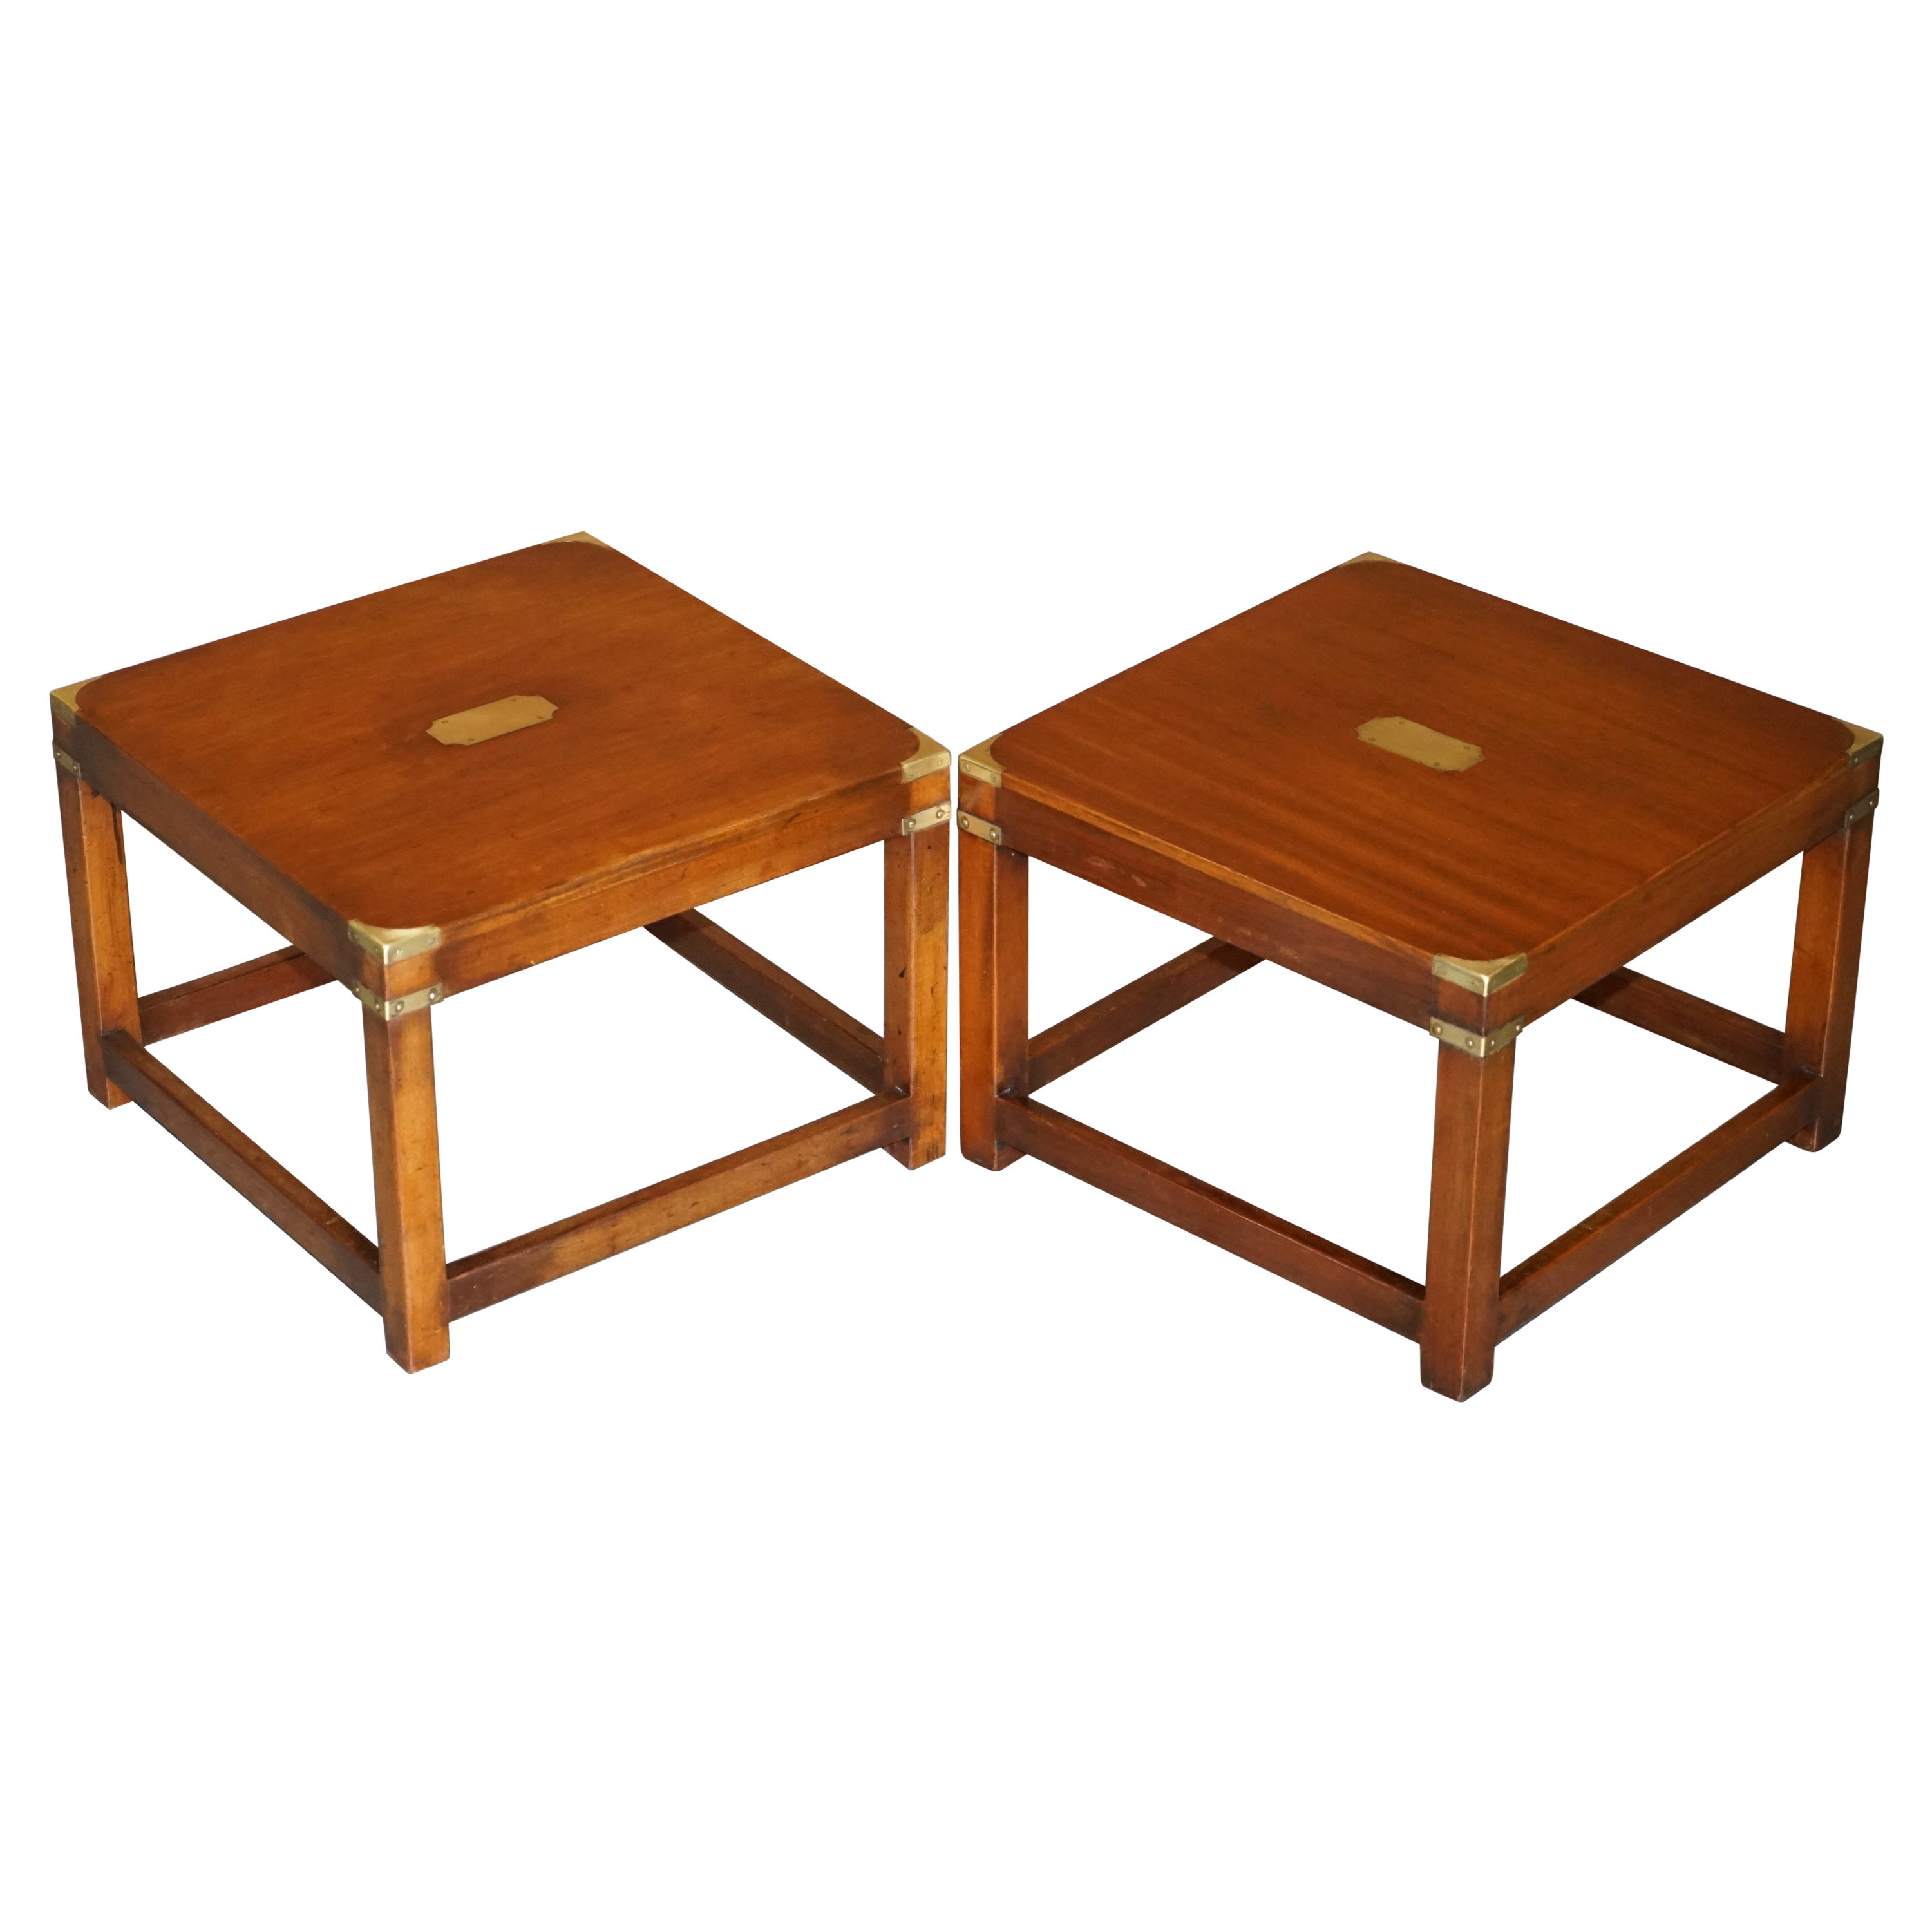 Lovely Pair of Restored Harrods Kennedy Mahogany Military Campaign Side Tables